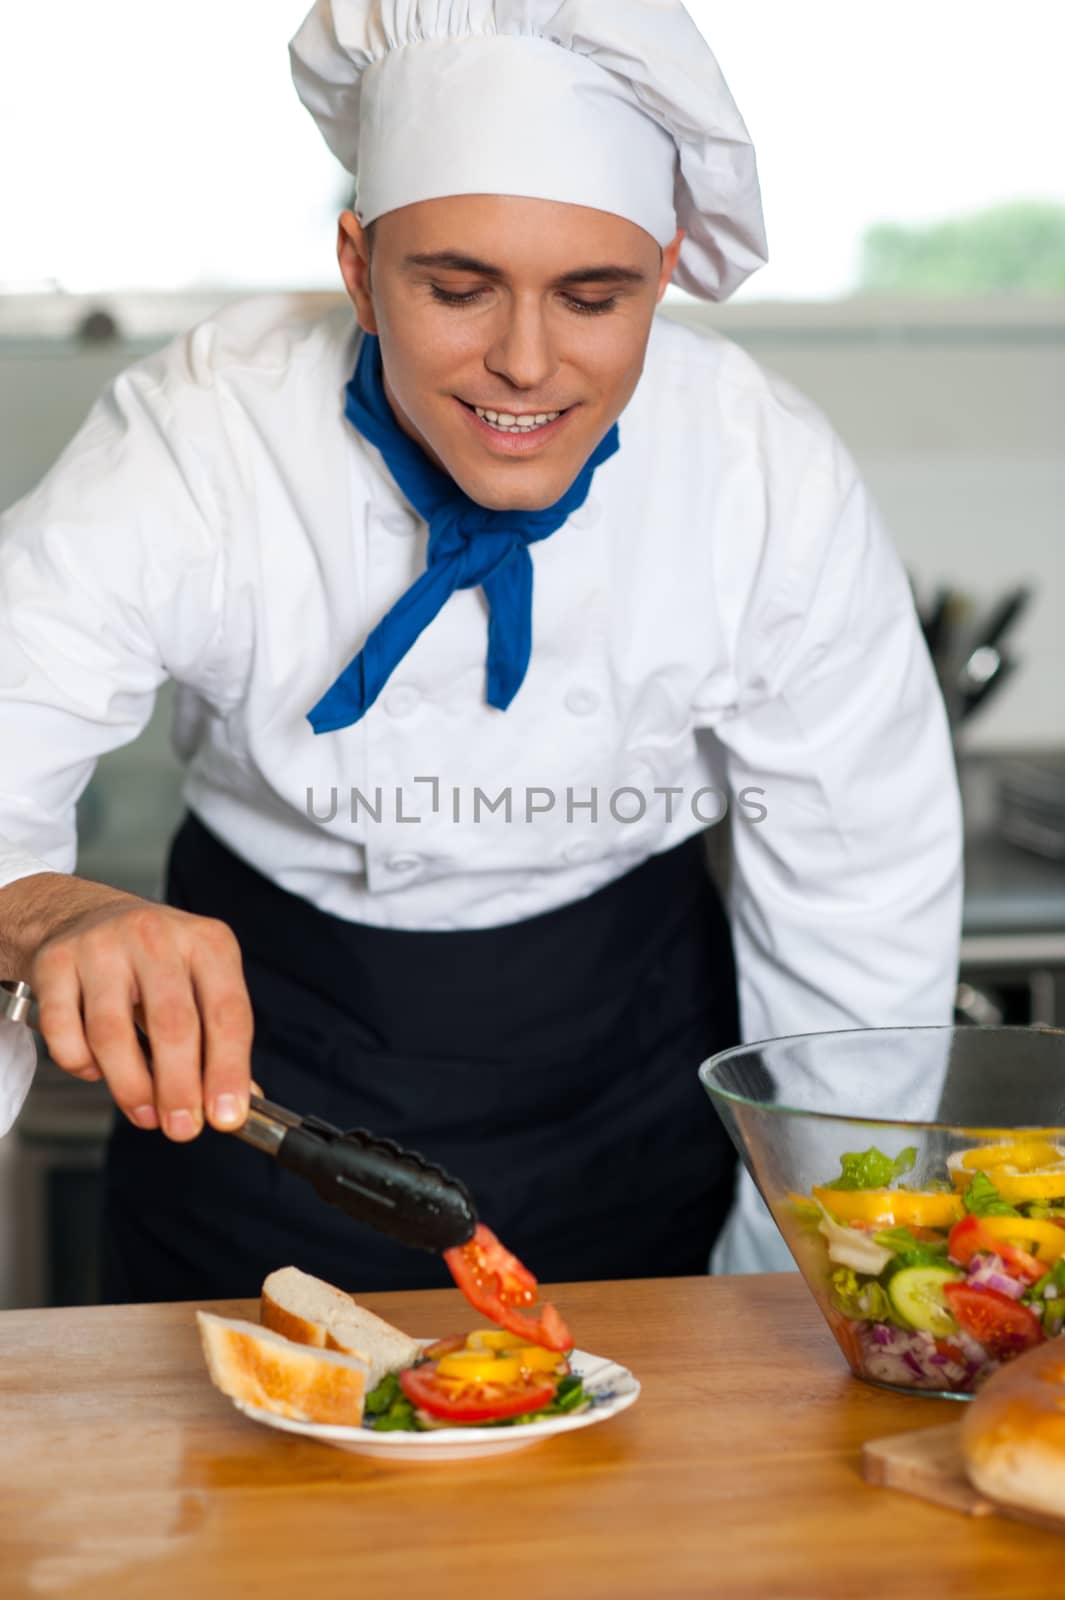 The yummy dish is ready to be served by stockyimages